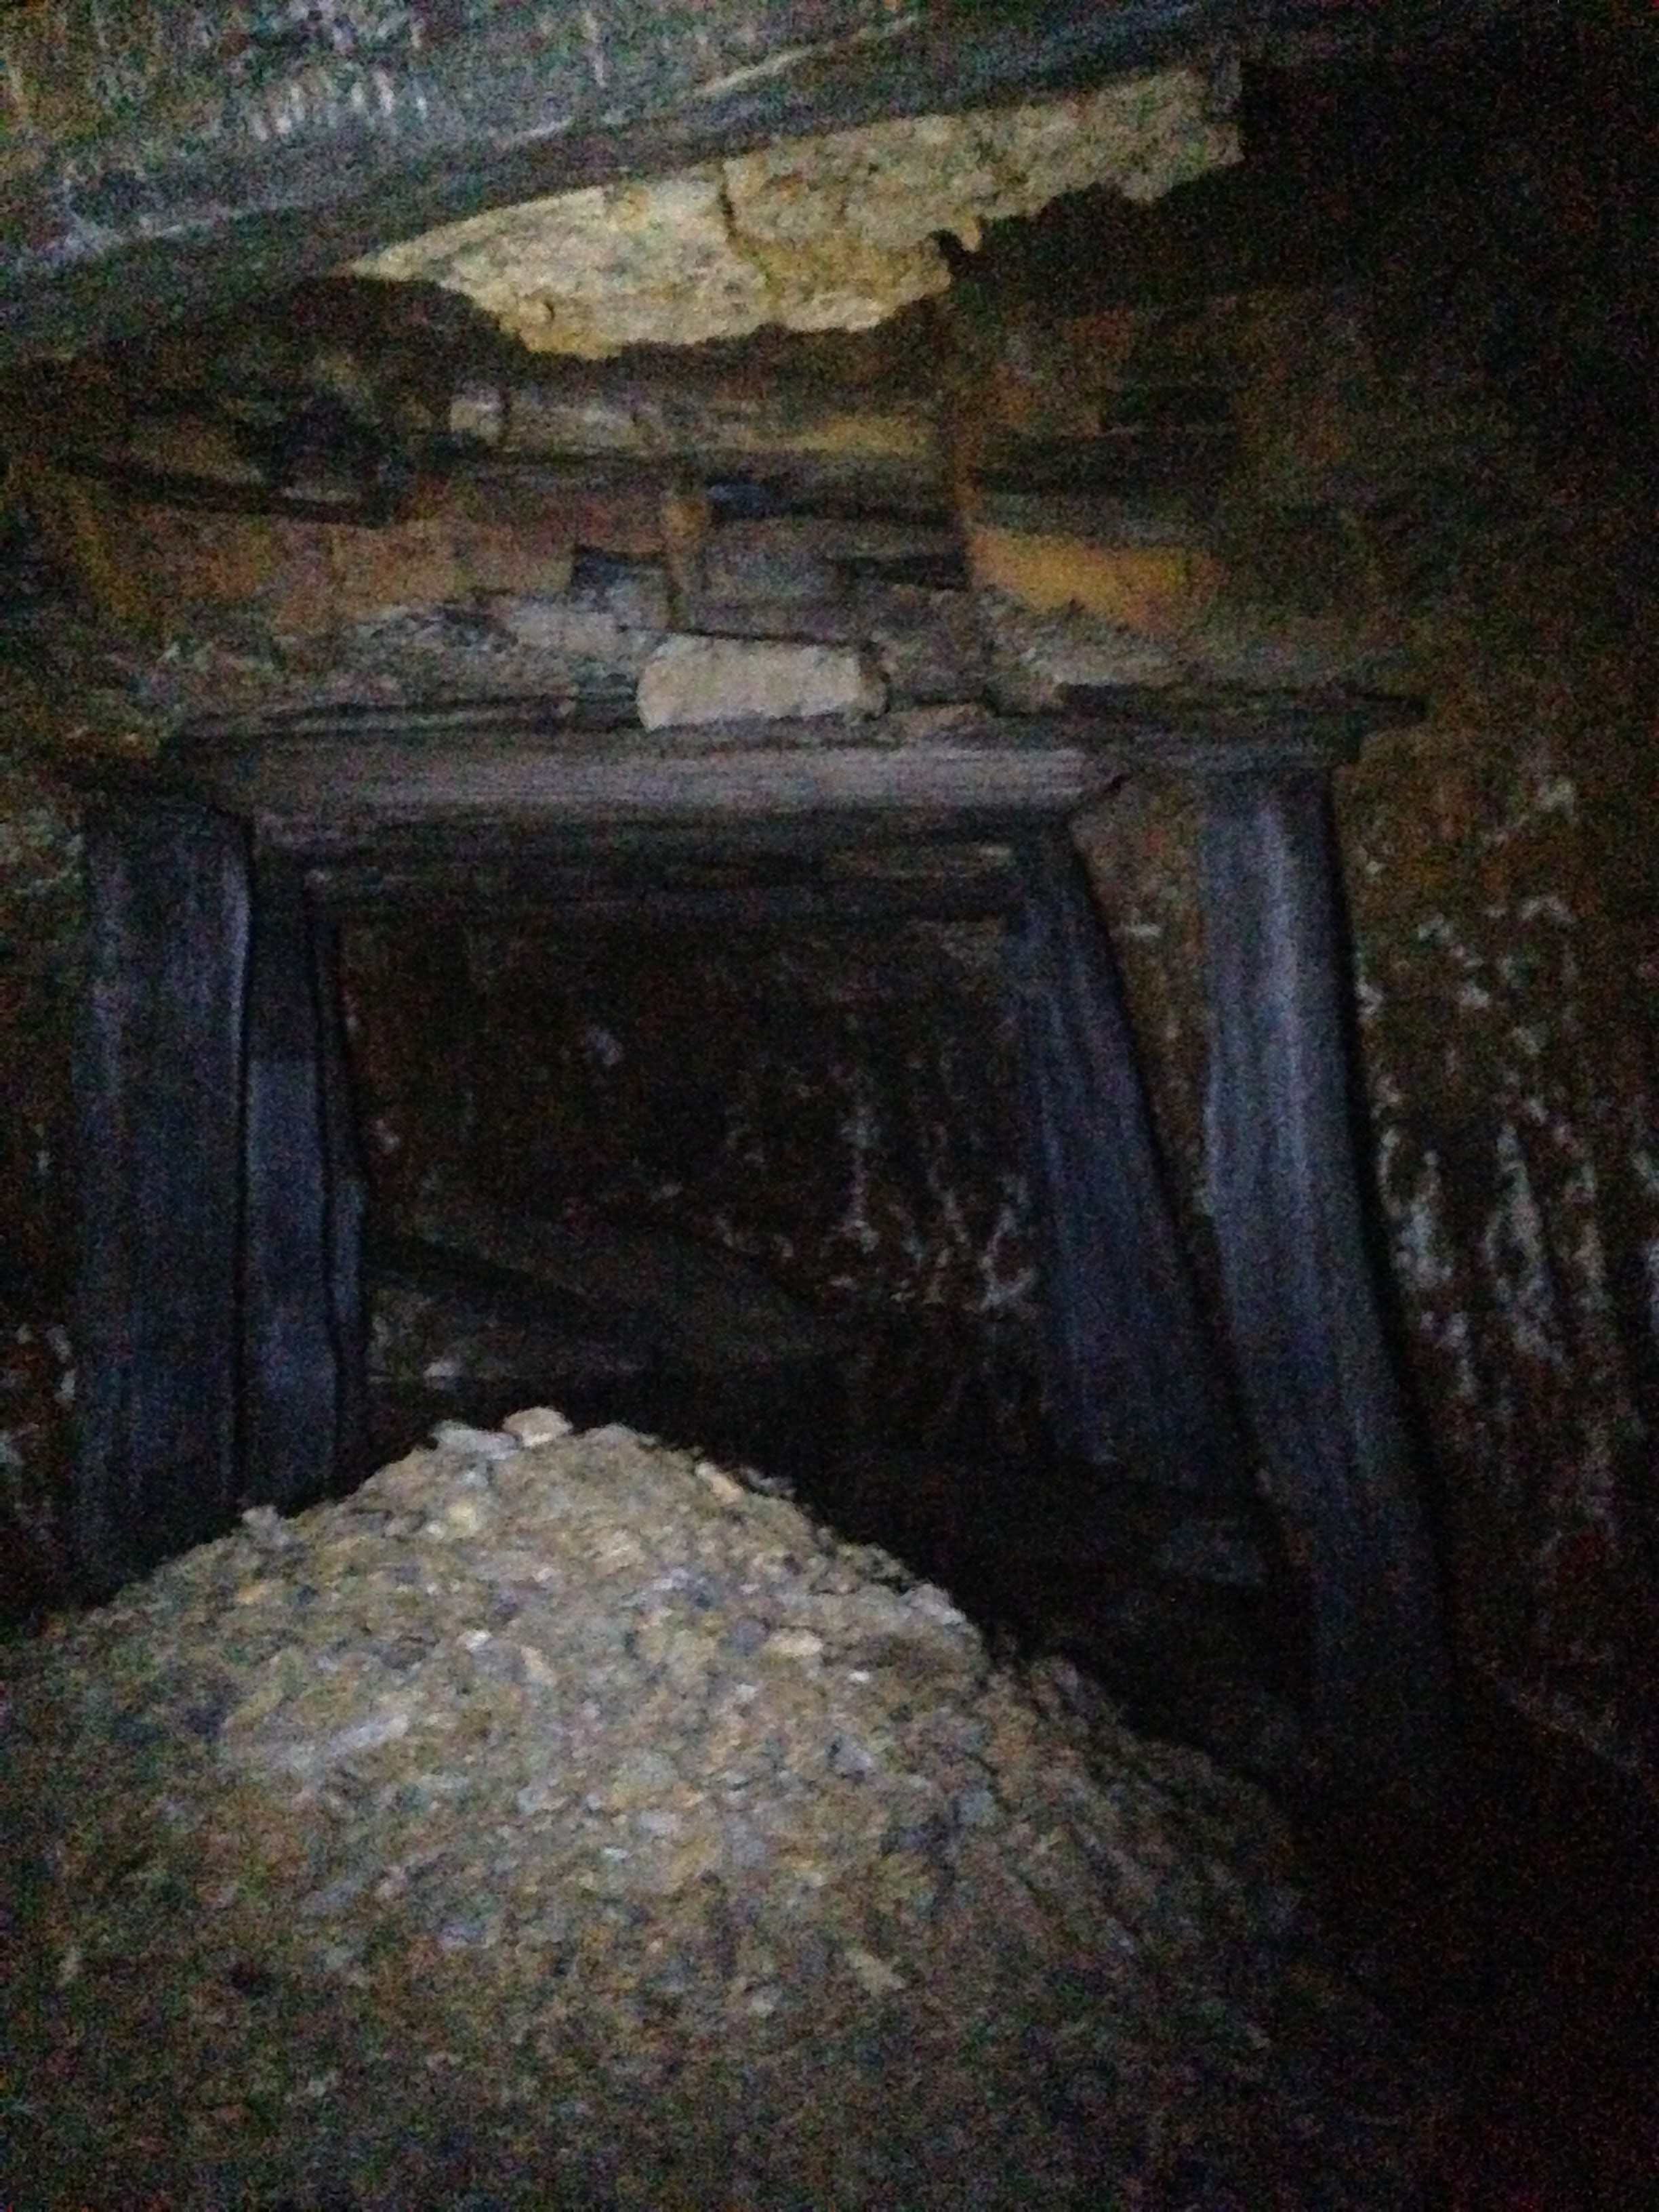 May 2017 Exploration of the mines, yes, it was dumb, but had to do it. Needed to make sure no bodies were in the mine, and wanted to see for myself where the water was coming from. Found the water, in both mines, the water comes from the very end where the miners apparently hit a water vein. Guessing this is what caused them to abandon the mines. Water flow (combined) varies from 6 gpm to 160 gpm.